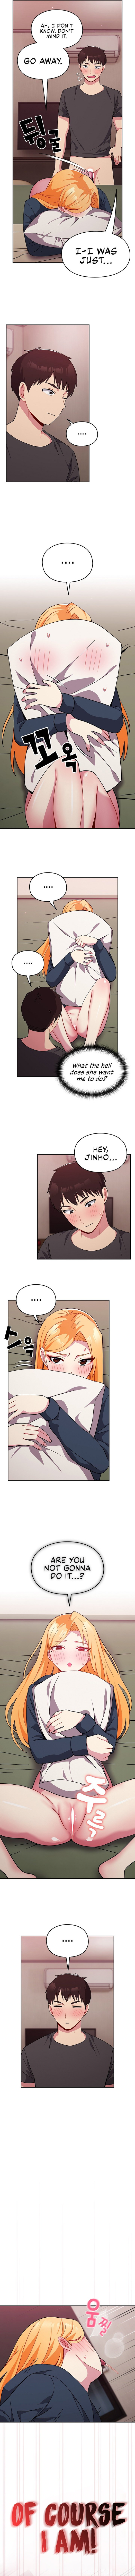 when-did-we-start-dating-chap-35-6